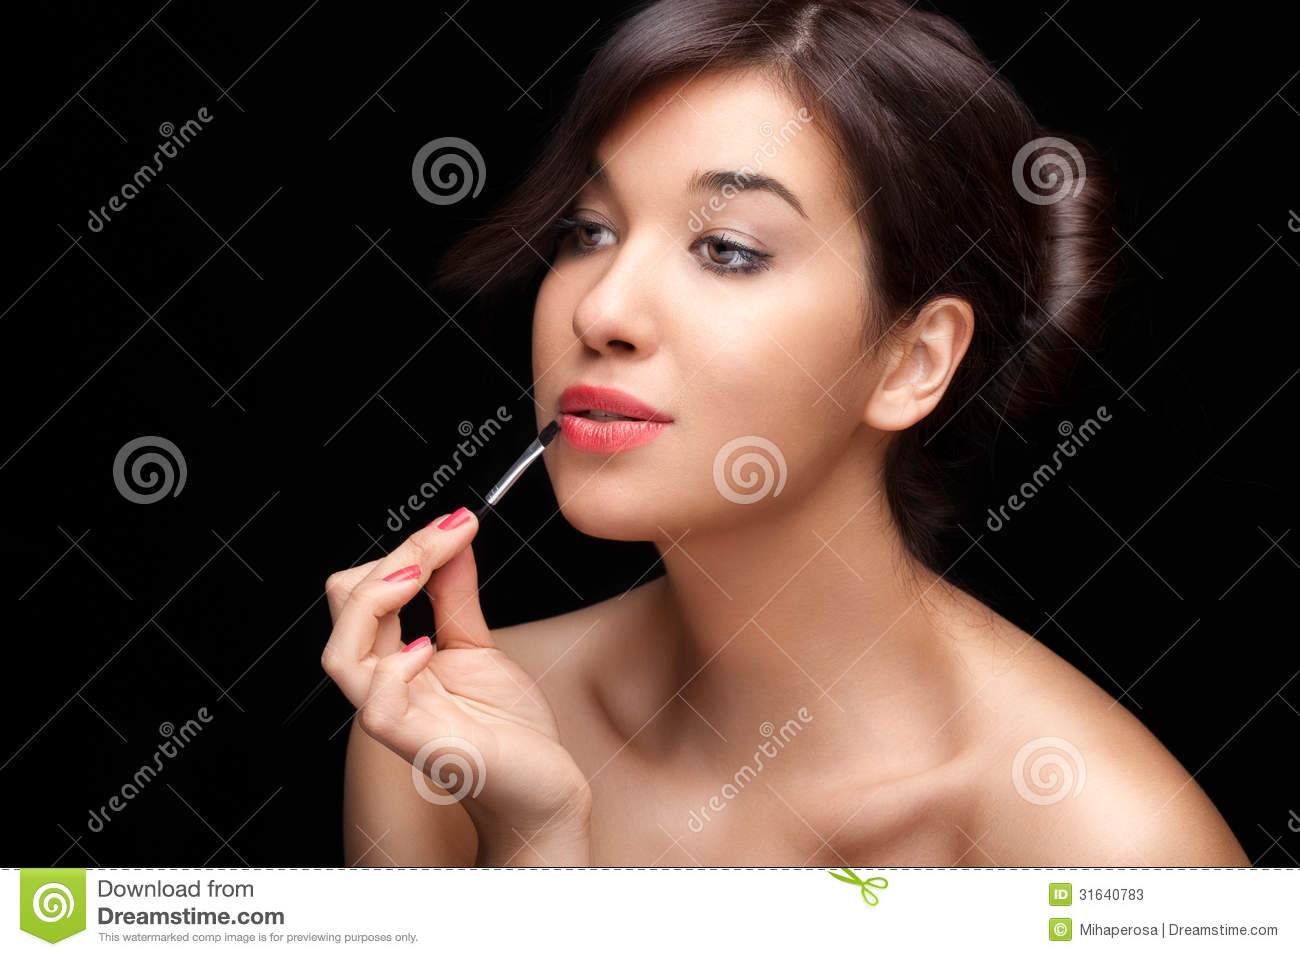 Woman Painting Herself   Superb Beauty Stock Photos   Image  31640783